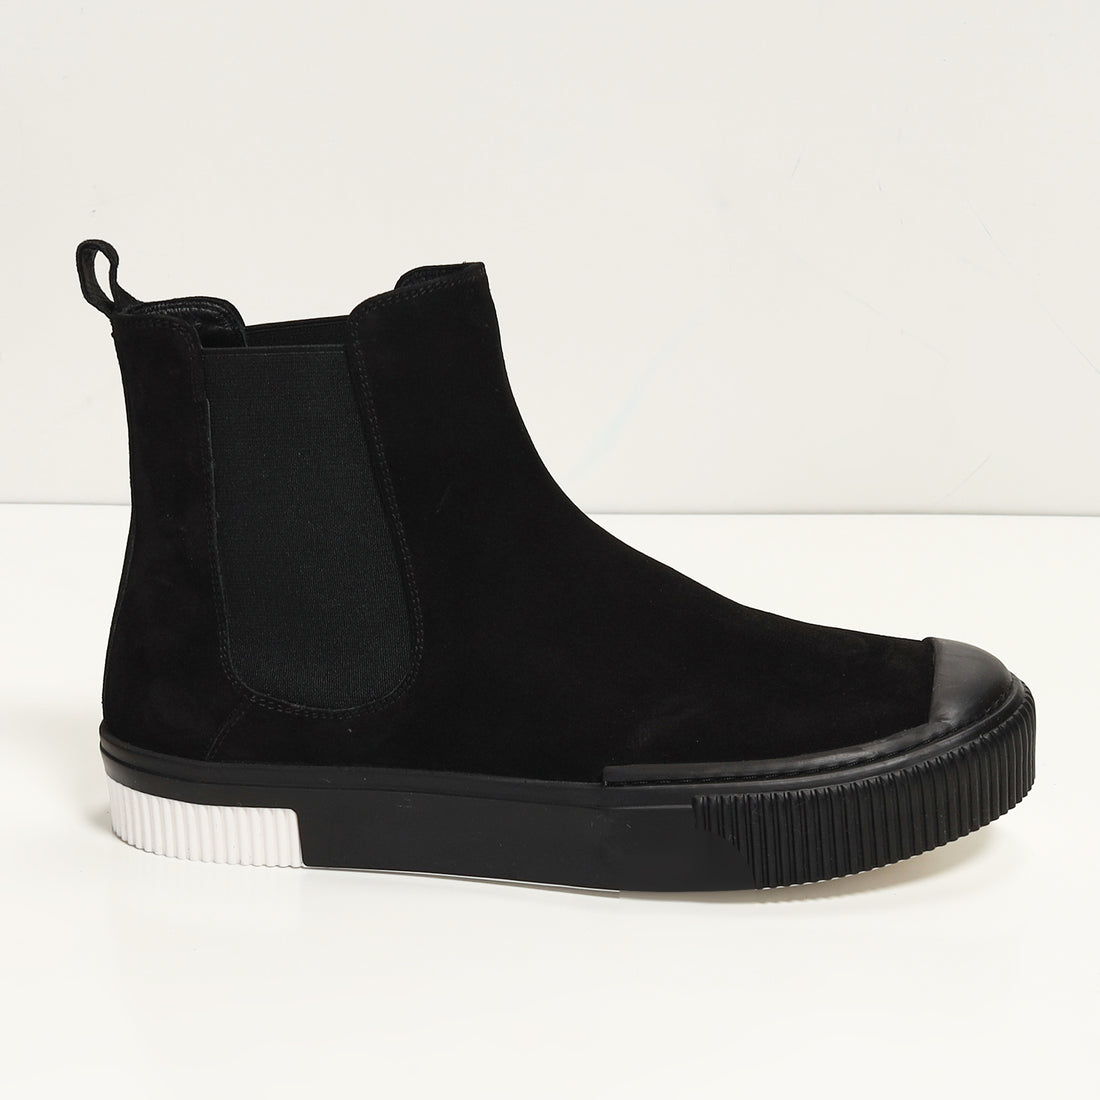 THE KING - Suede Leather and Rubber Sole Chelsea Boots - Black Black